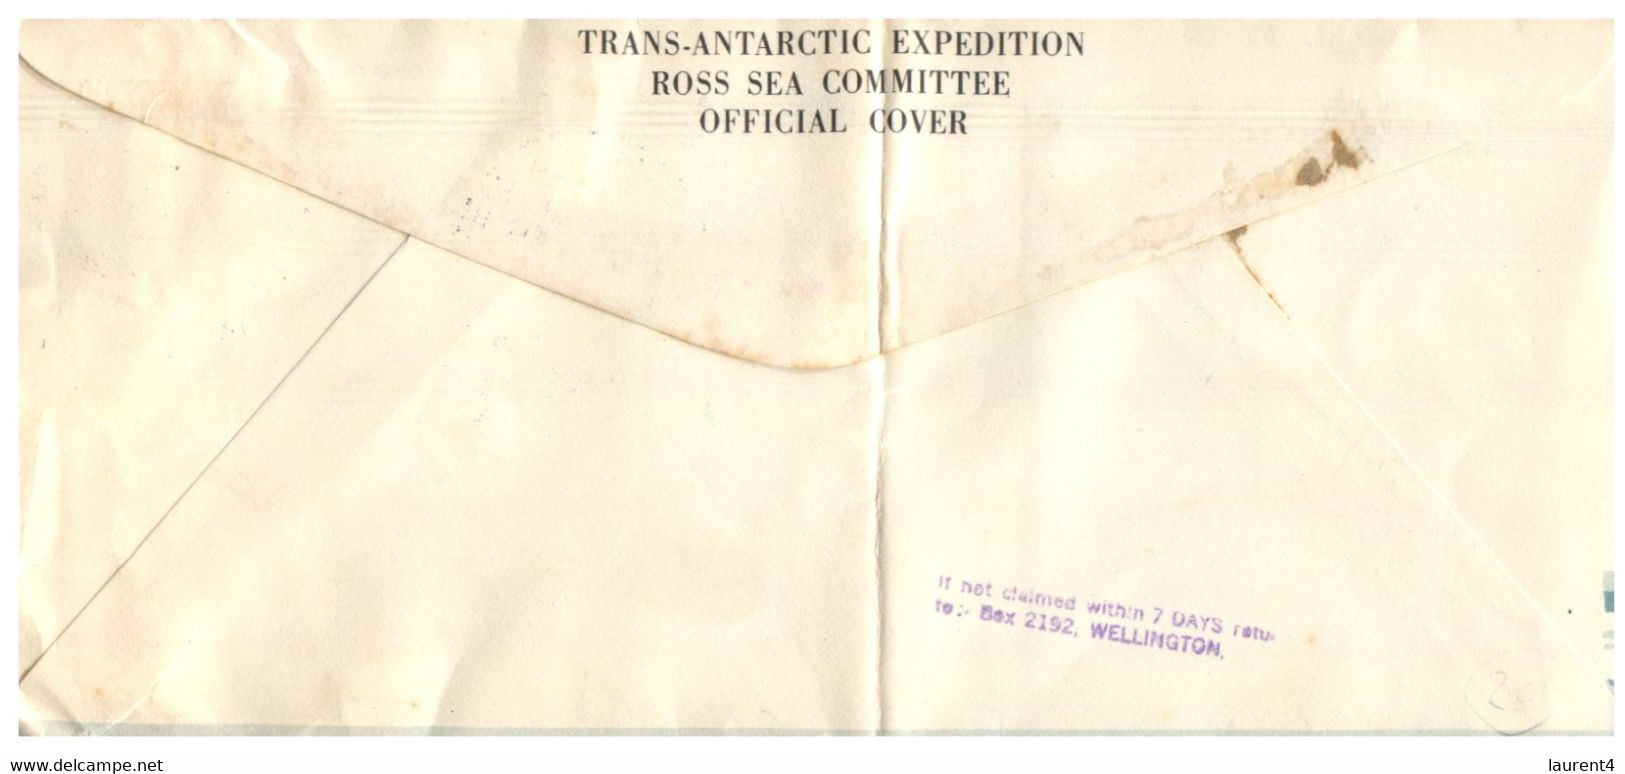 (VV 8) New Zealand  - Cover 1960's Posted To Australia - 1st Trans-Antarctic Crossing - Lettres & Documents